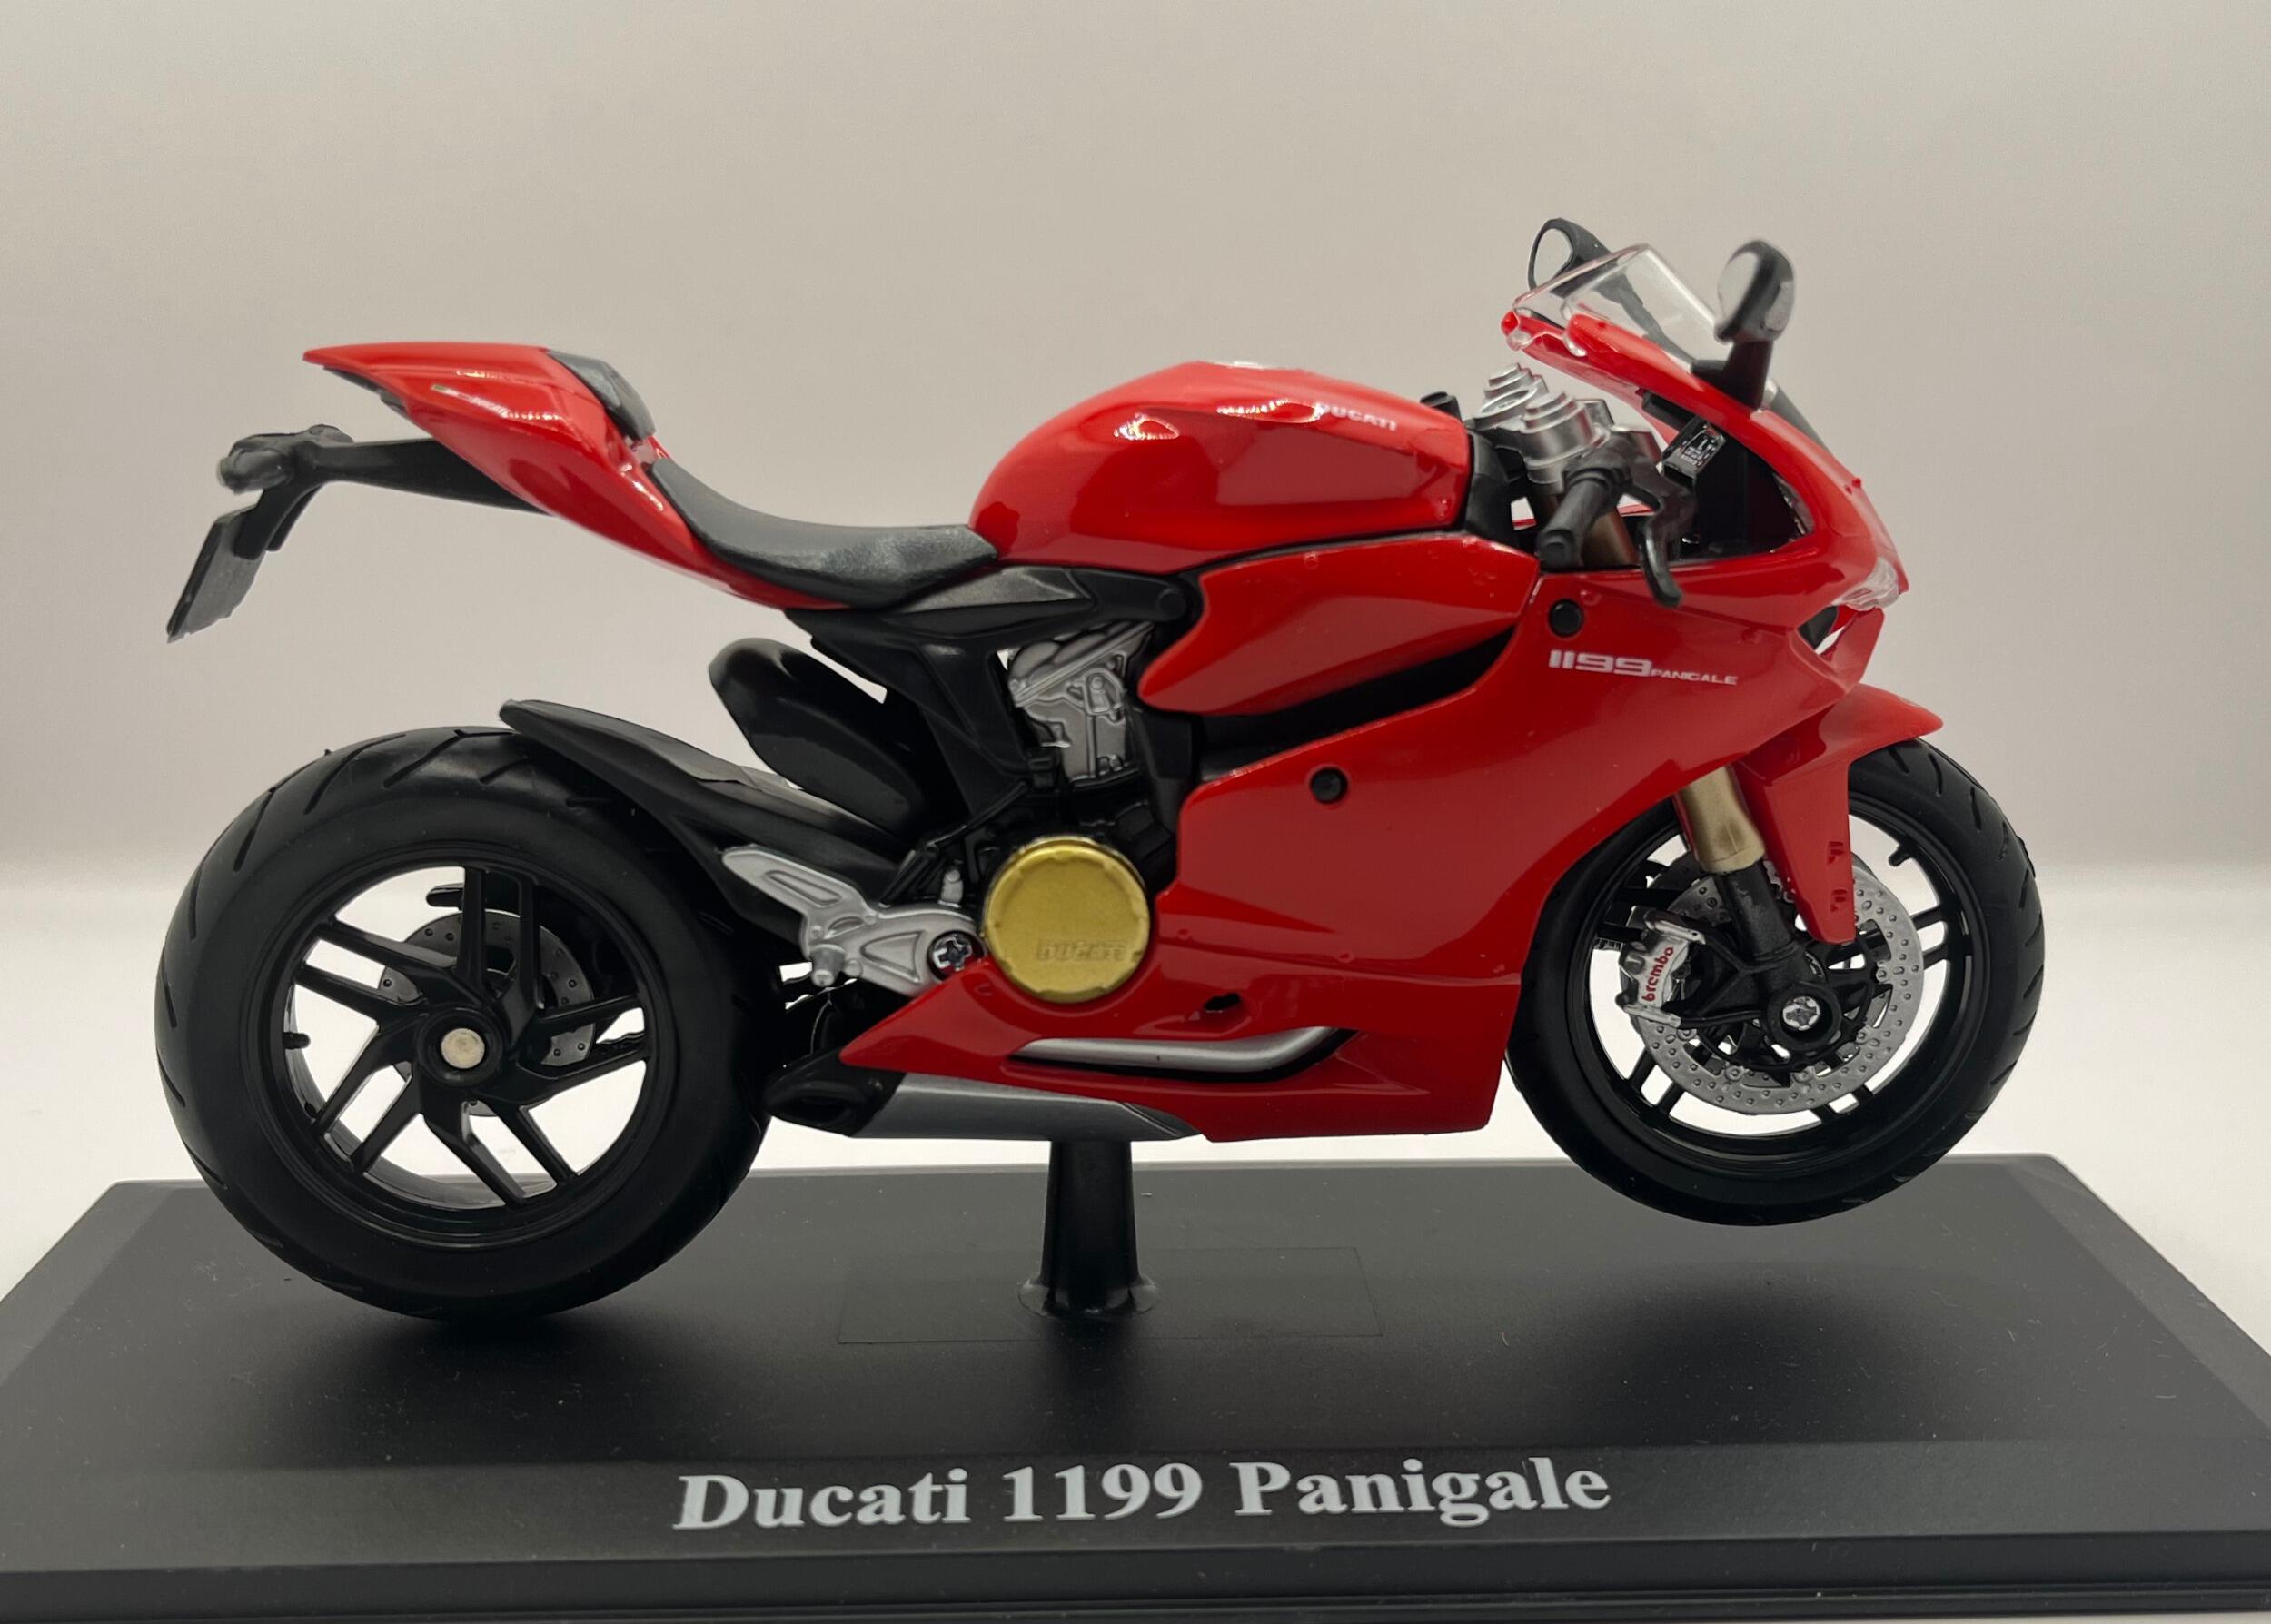 Ducati 1199 Panigale in red, 1:12 scale diecast motorbike model from Maisto mounted on a plinth, MAI32704